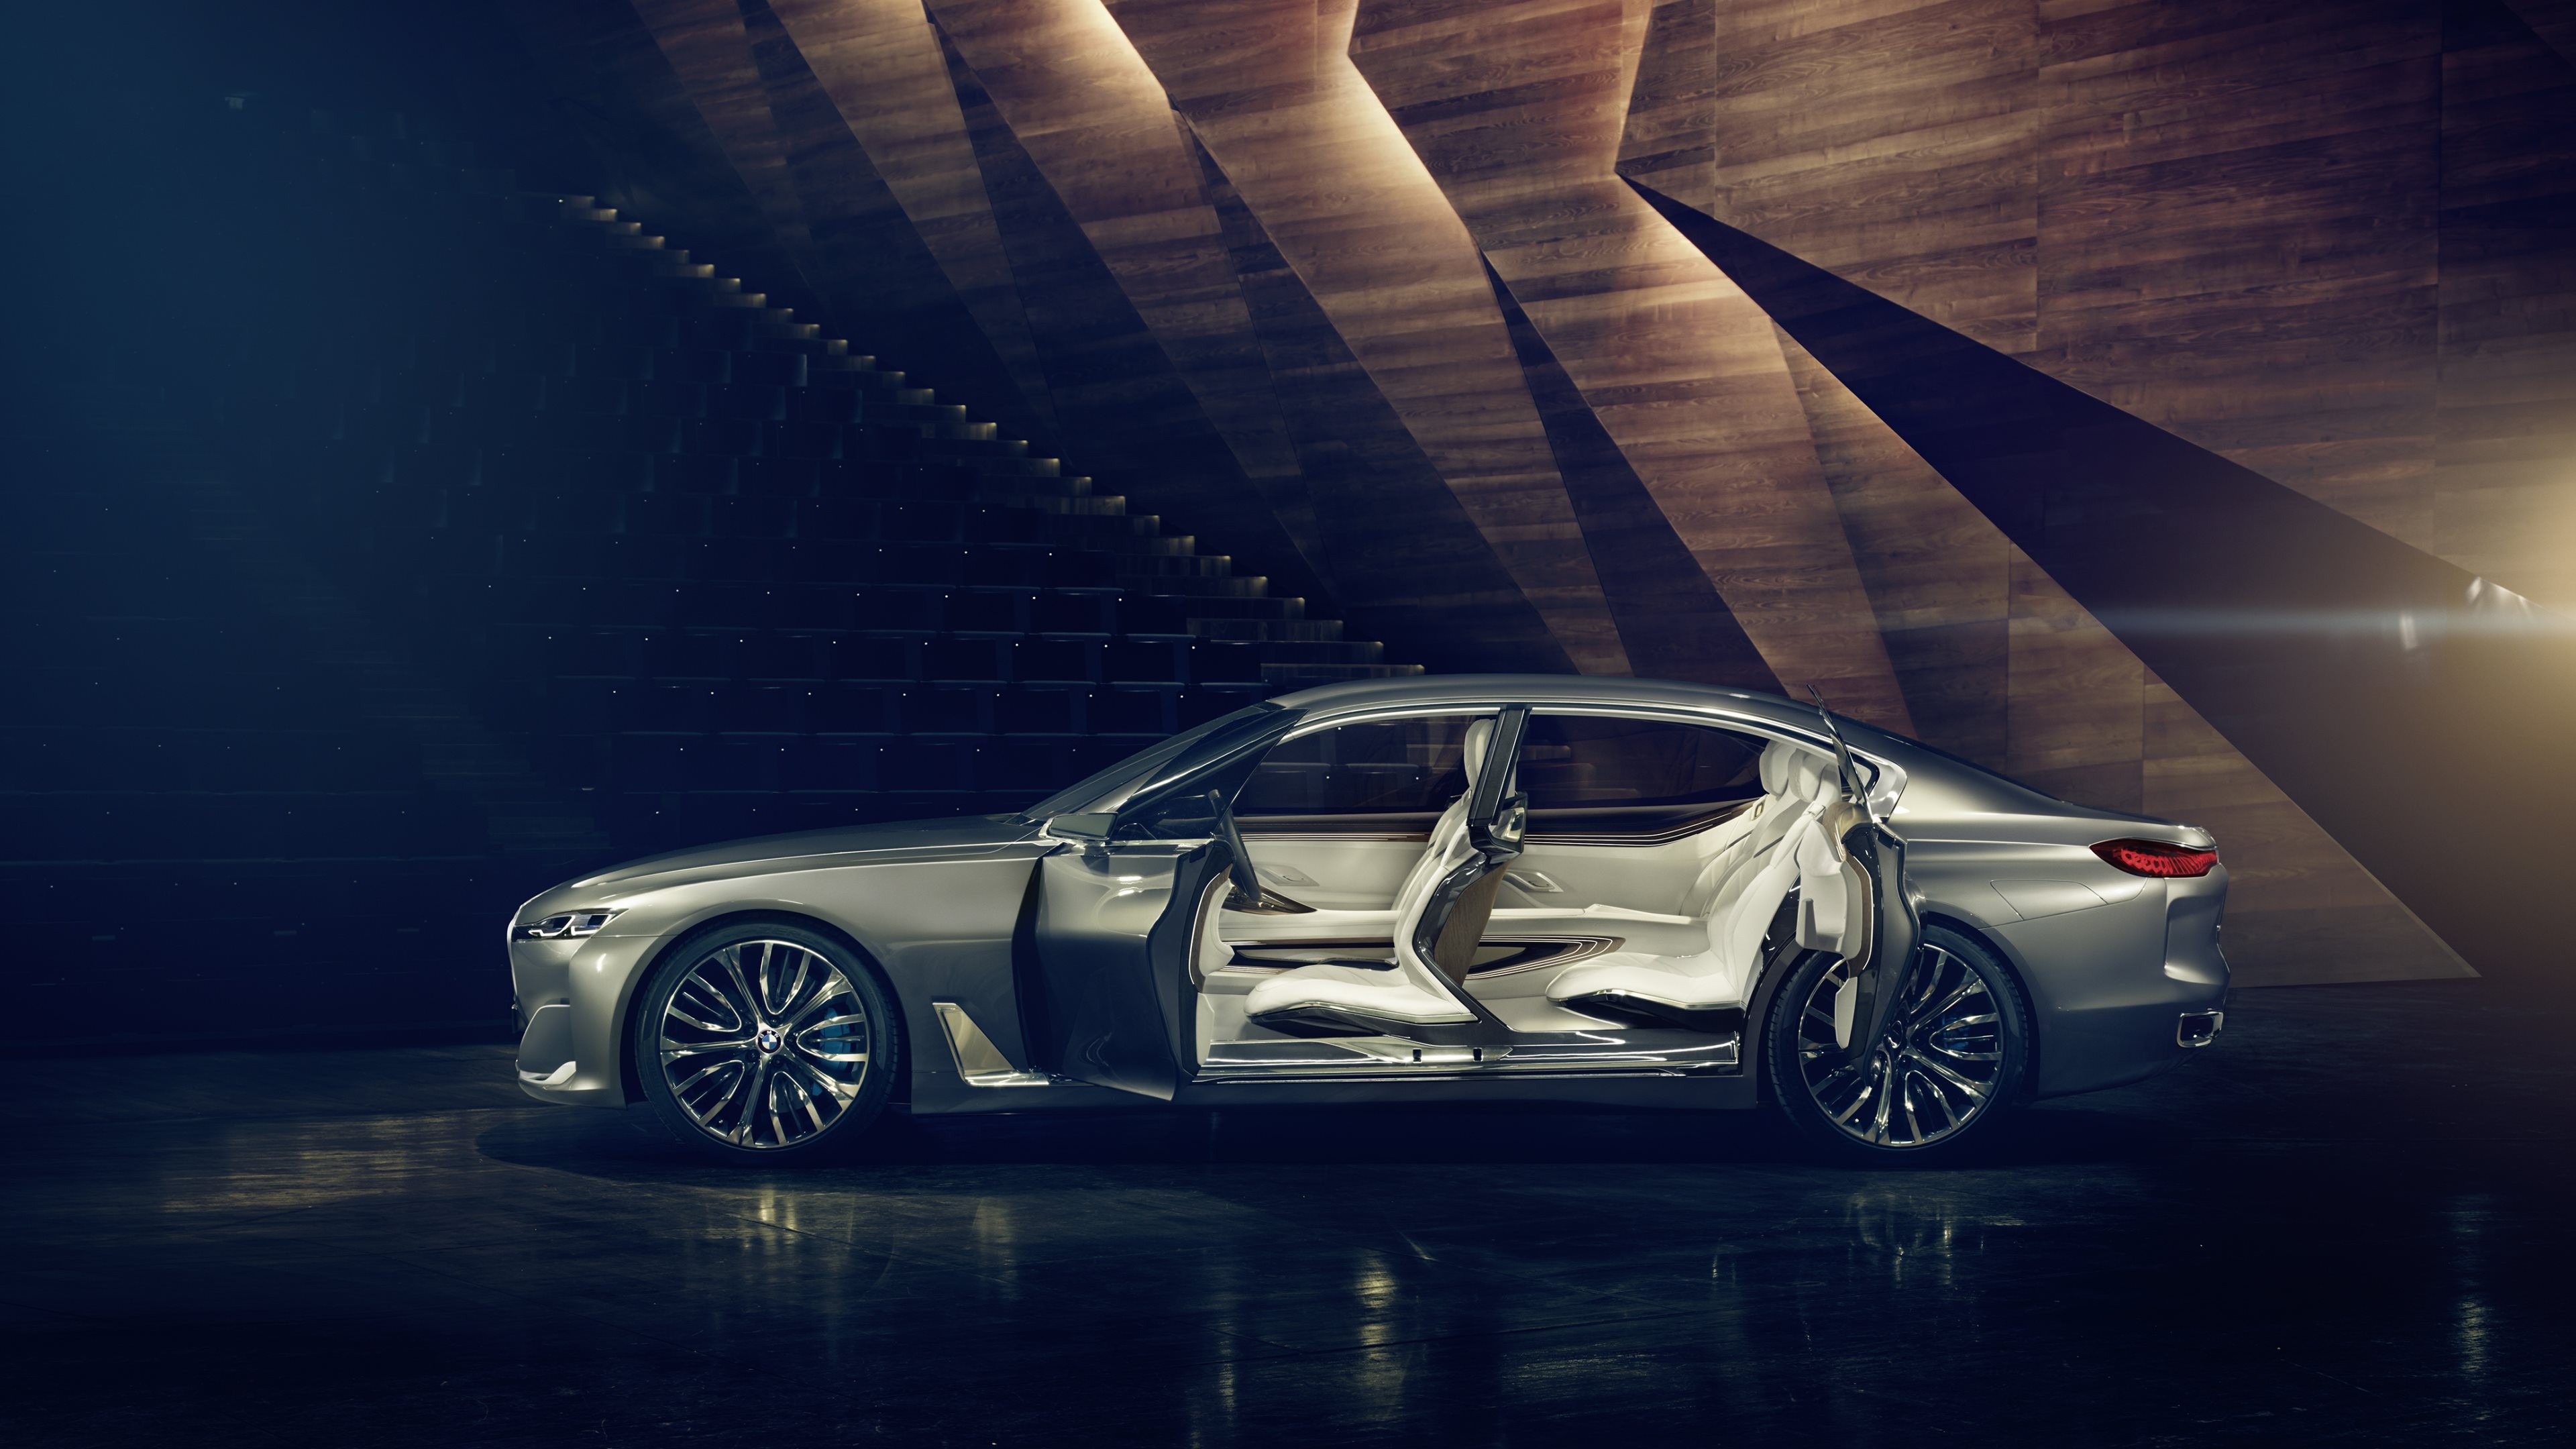 HD Wallpaper for theme: BMW Vision Future Luxury HD wallpaper, background